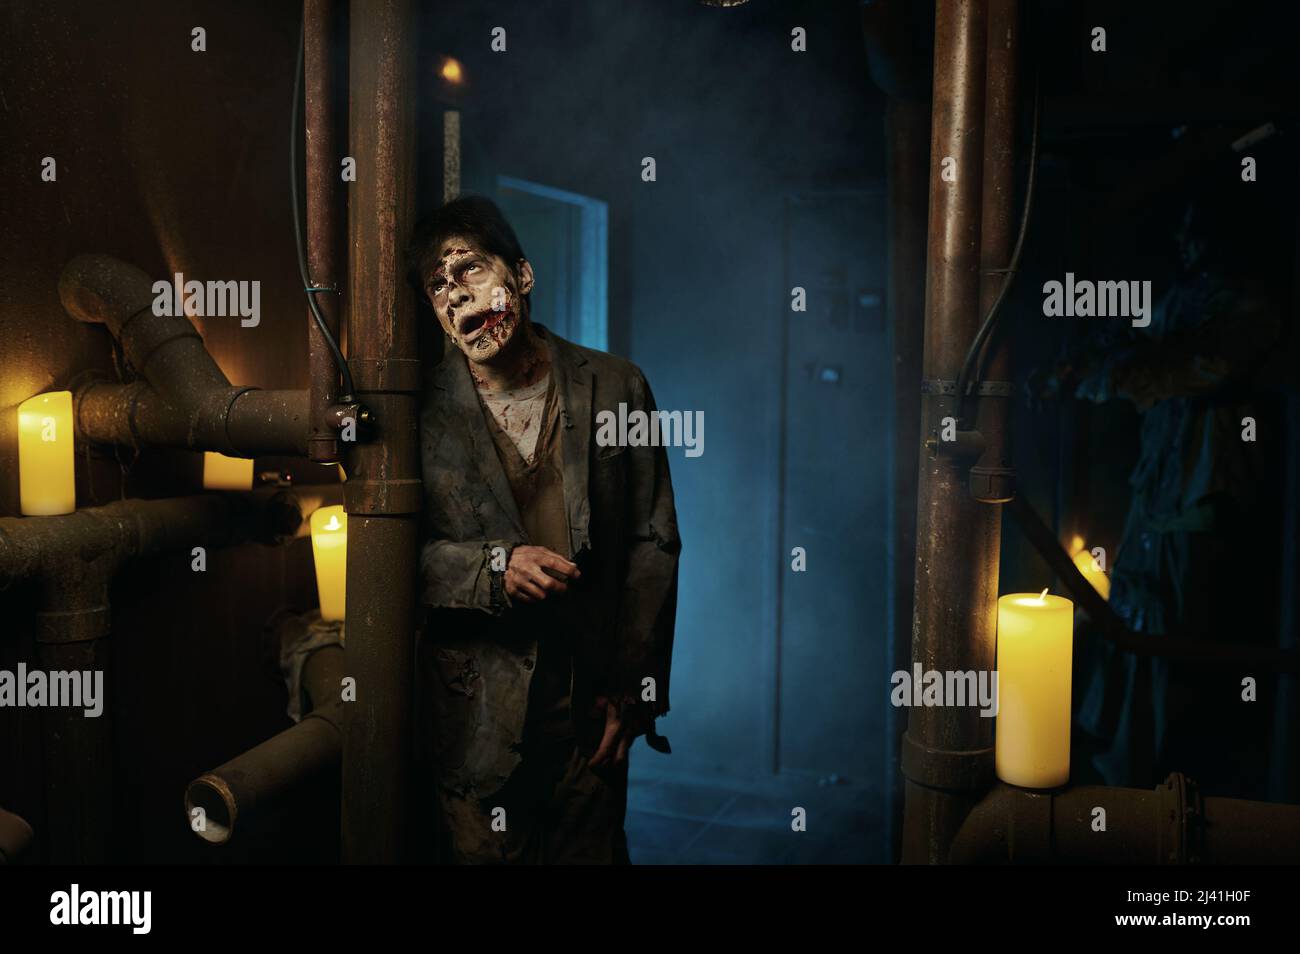 Zombie man in basement with pipes portrait Stock Photo